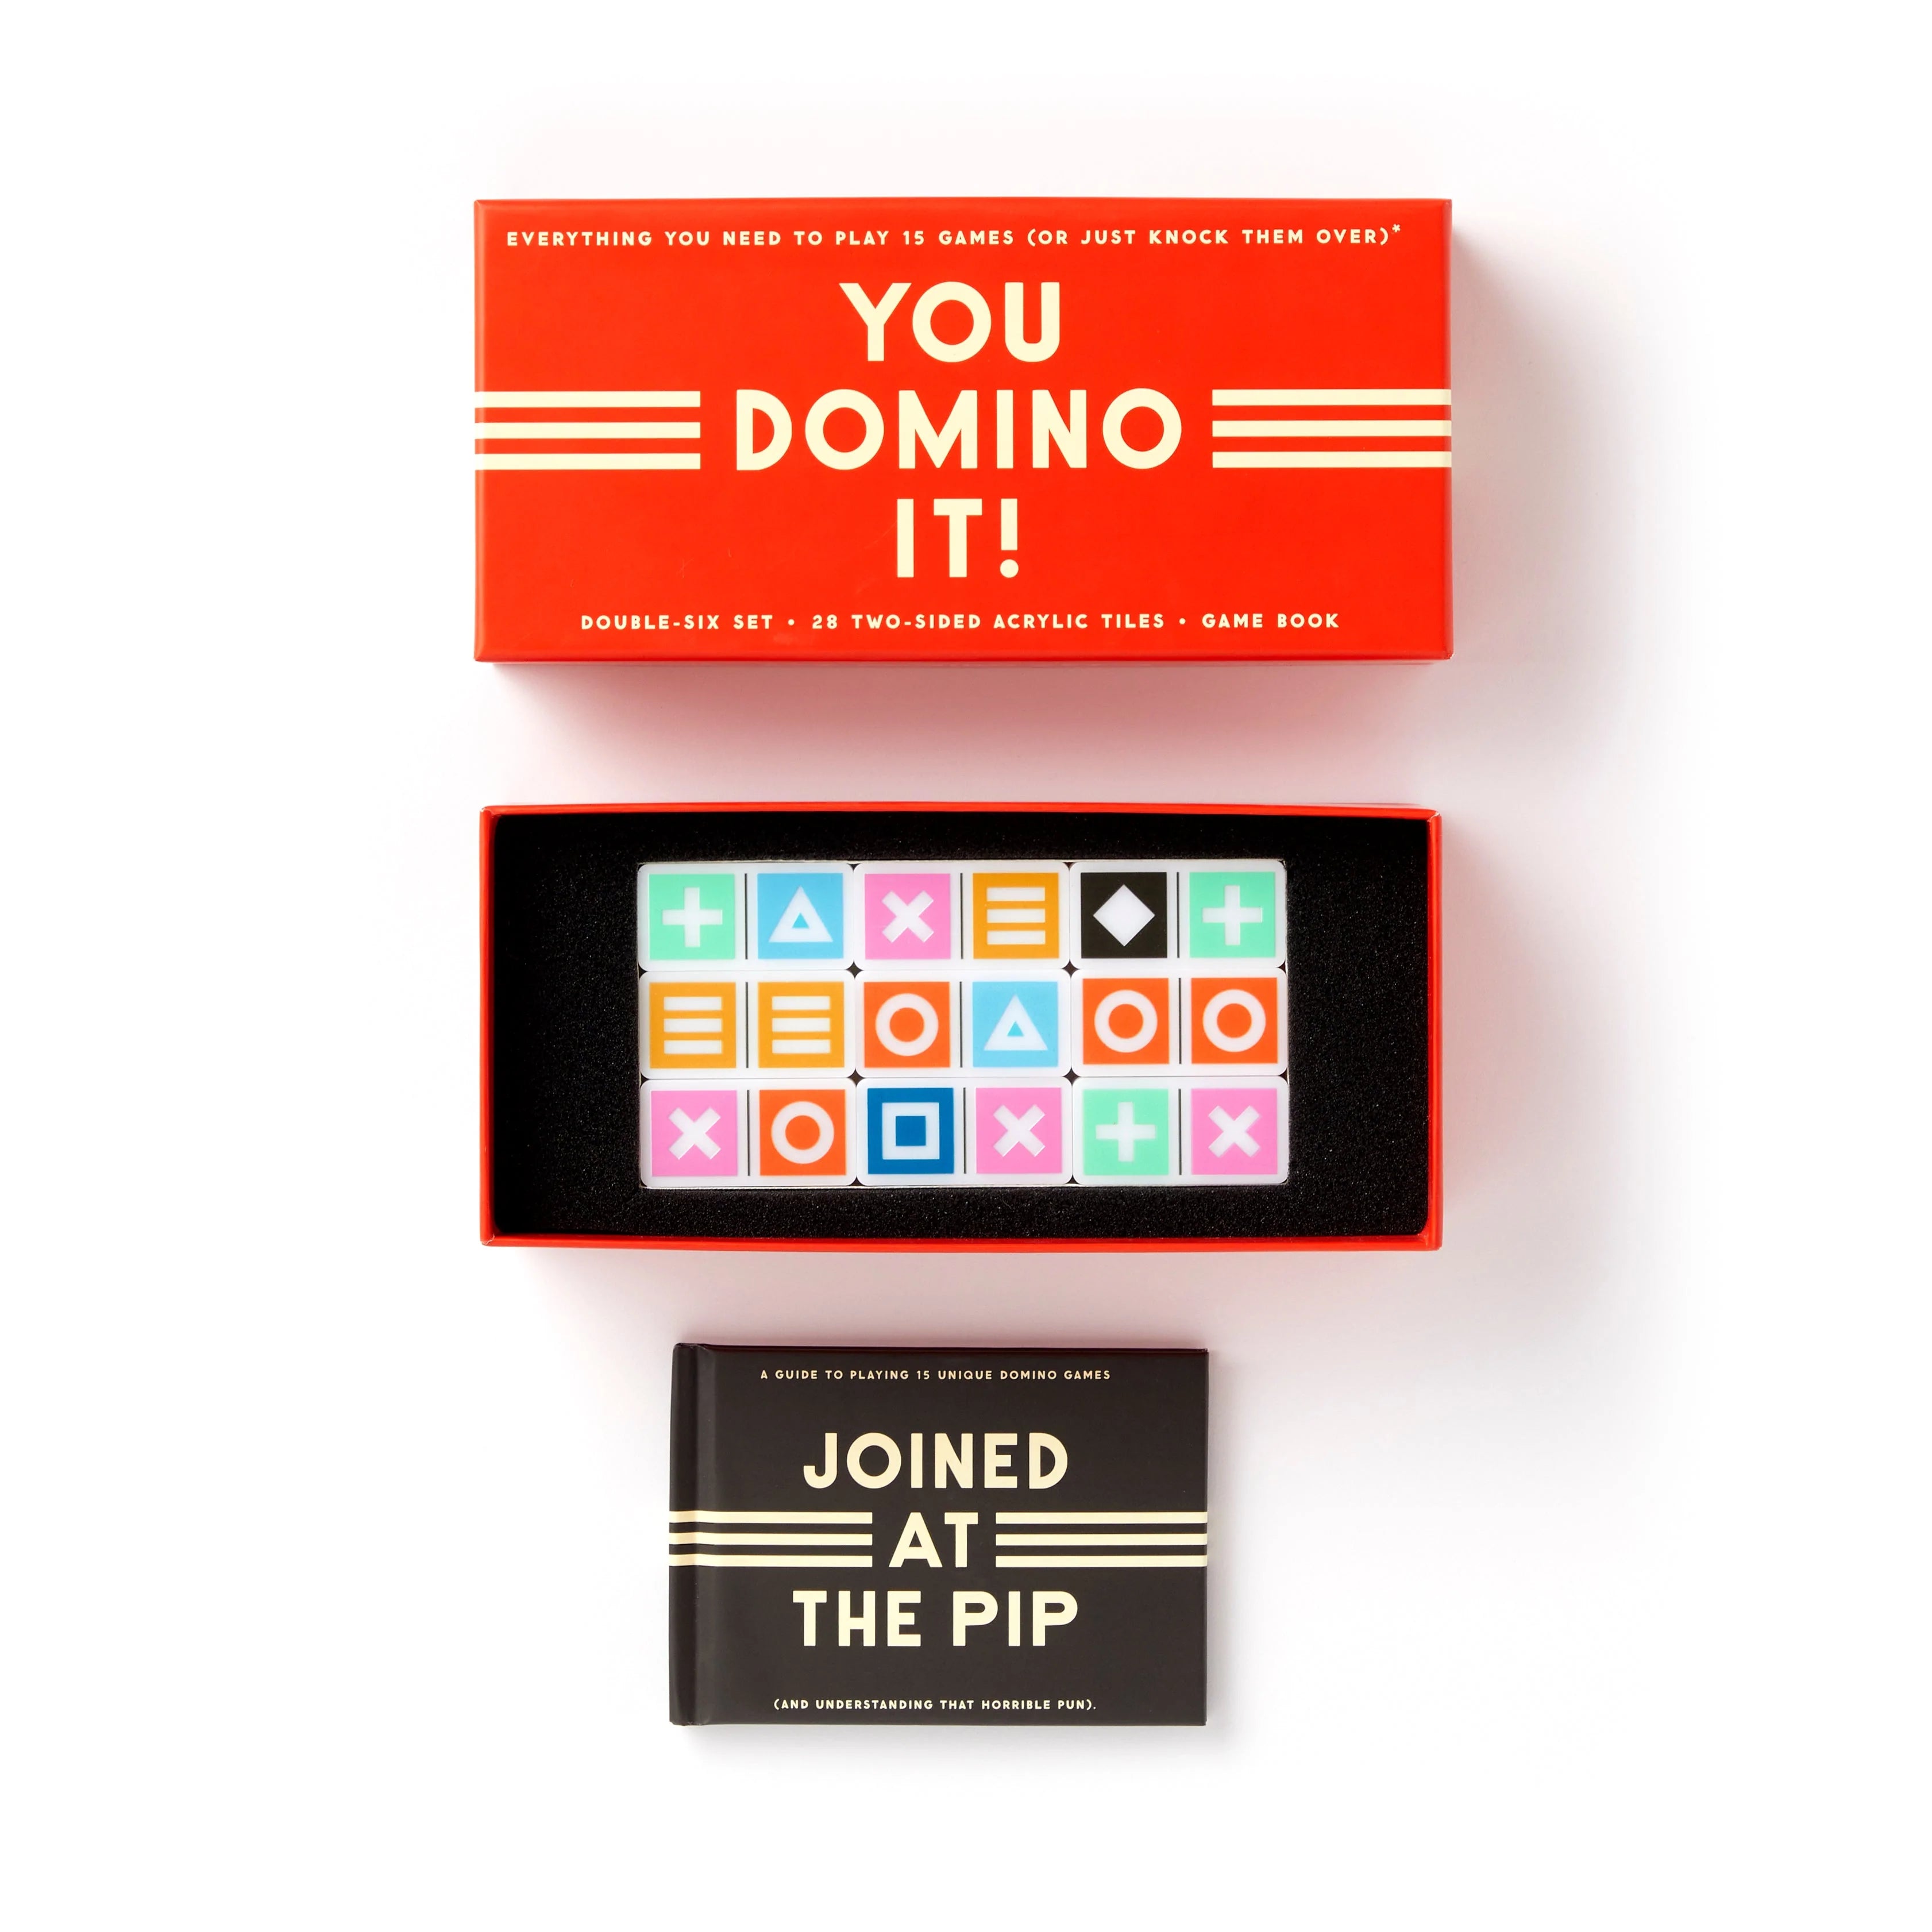 You Domino It! Game Set by Brass Monkey Goods. Fun domino game. Party game with dominos. Game set with dominos. 15 domino game set. Games to play with friends. Family game night. Family memories games.